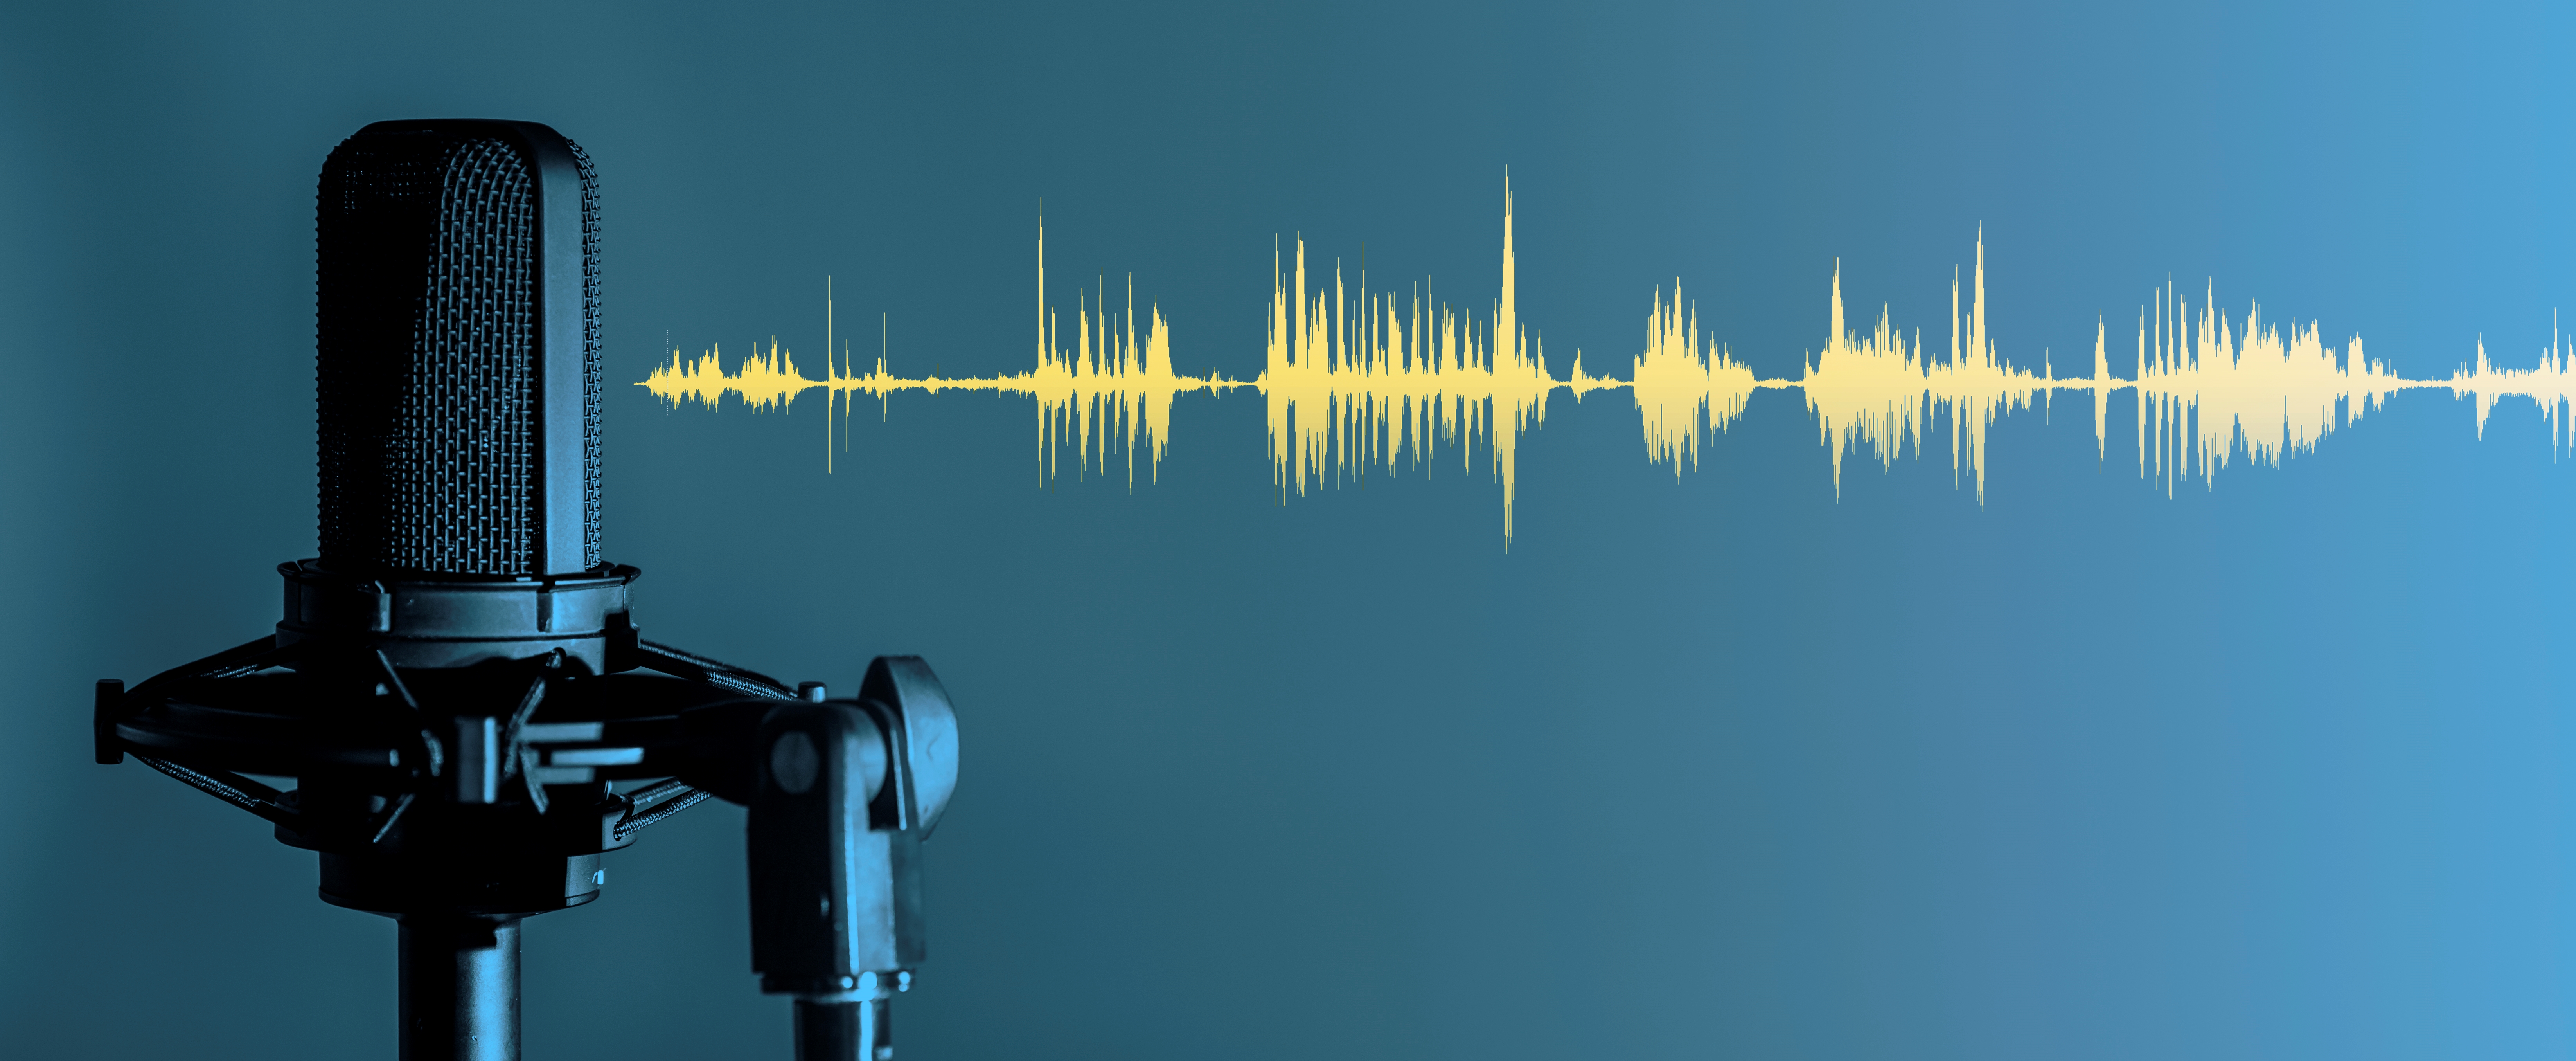 microphone and audio waves graphic